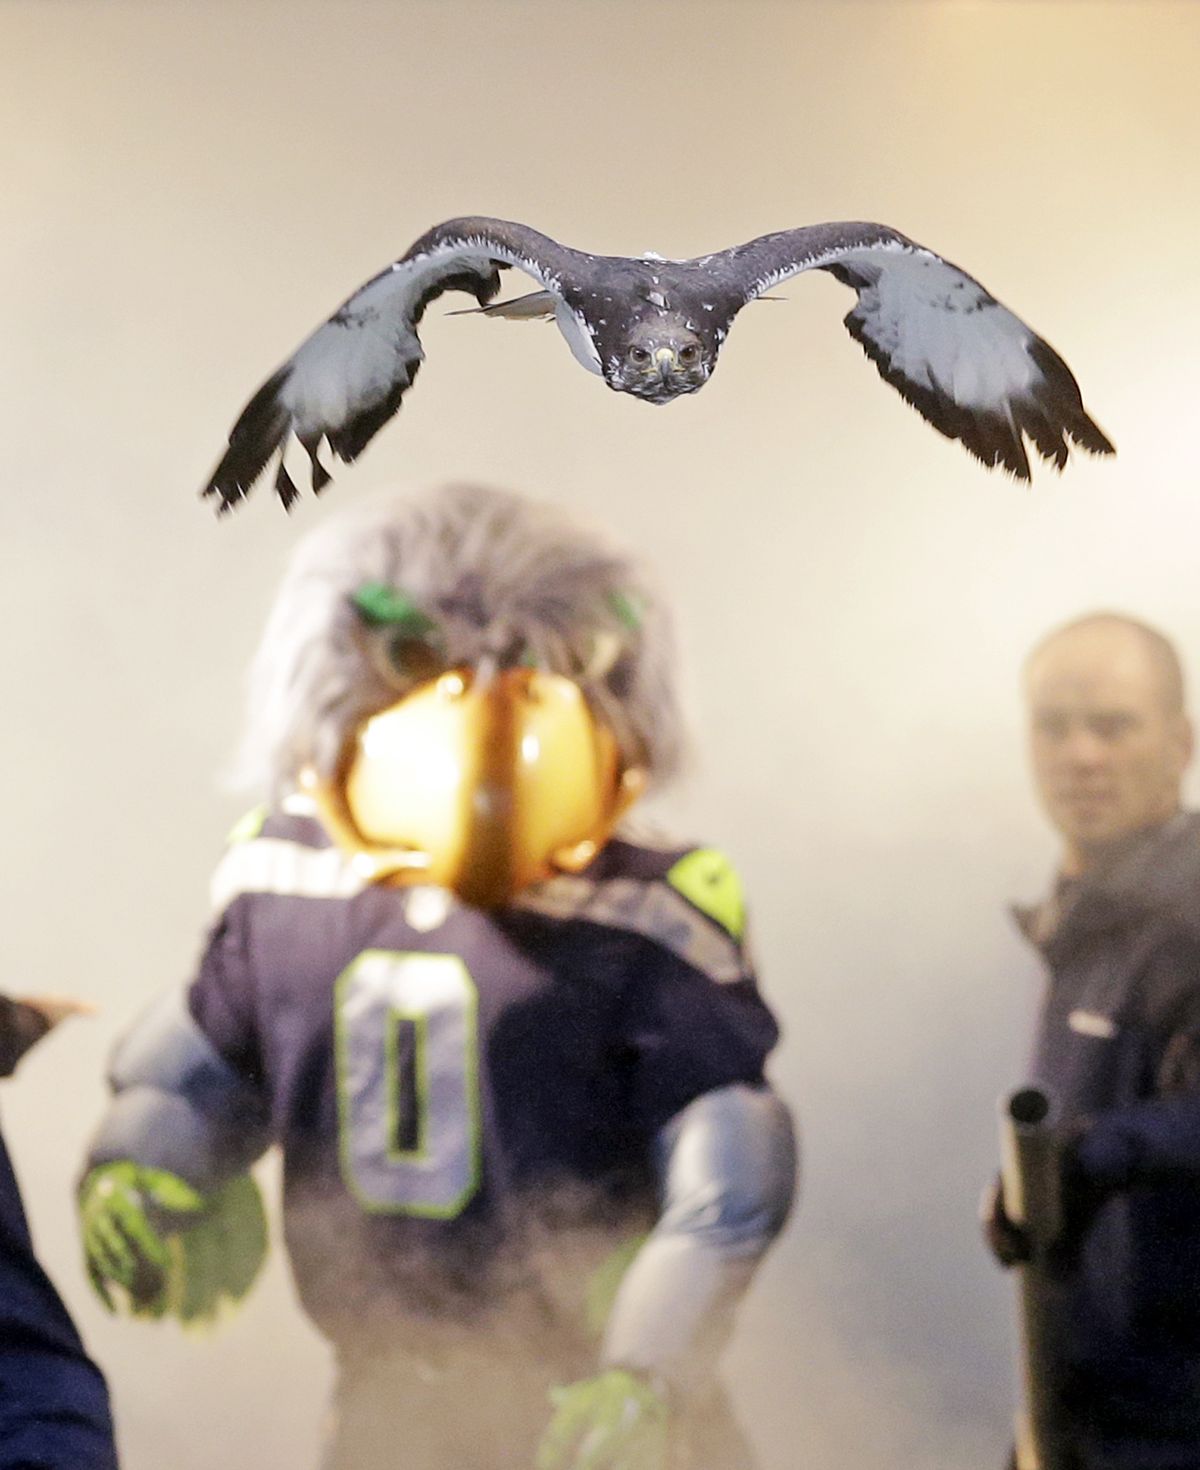 Taima, an augur hawk, flies out of a tunnel and onto the field ahead of the Seattle Seahawks’ mascot, Blitz, before player introductions for a recent NFL game against Arizona. (Associated Press)